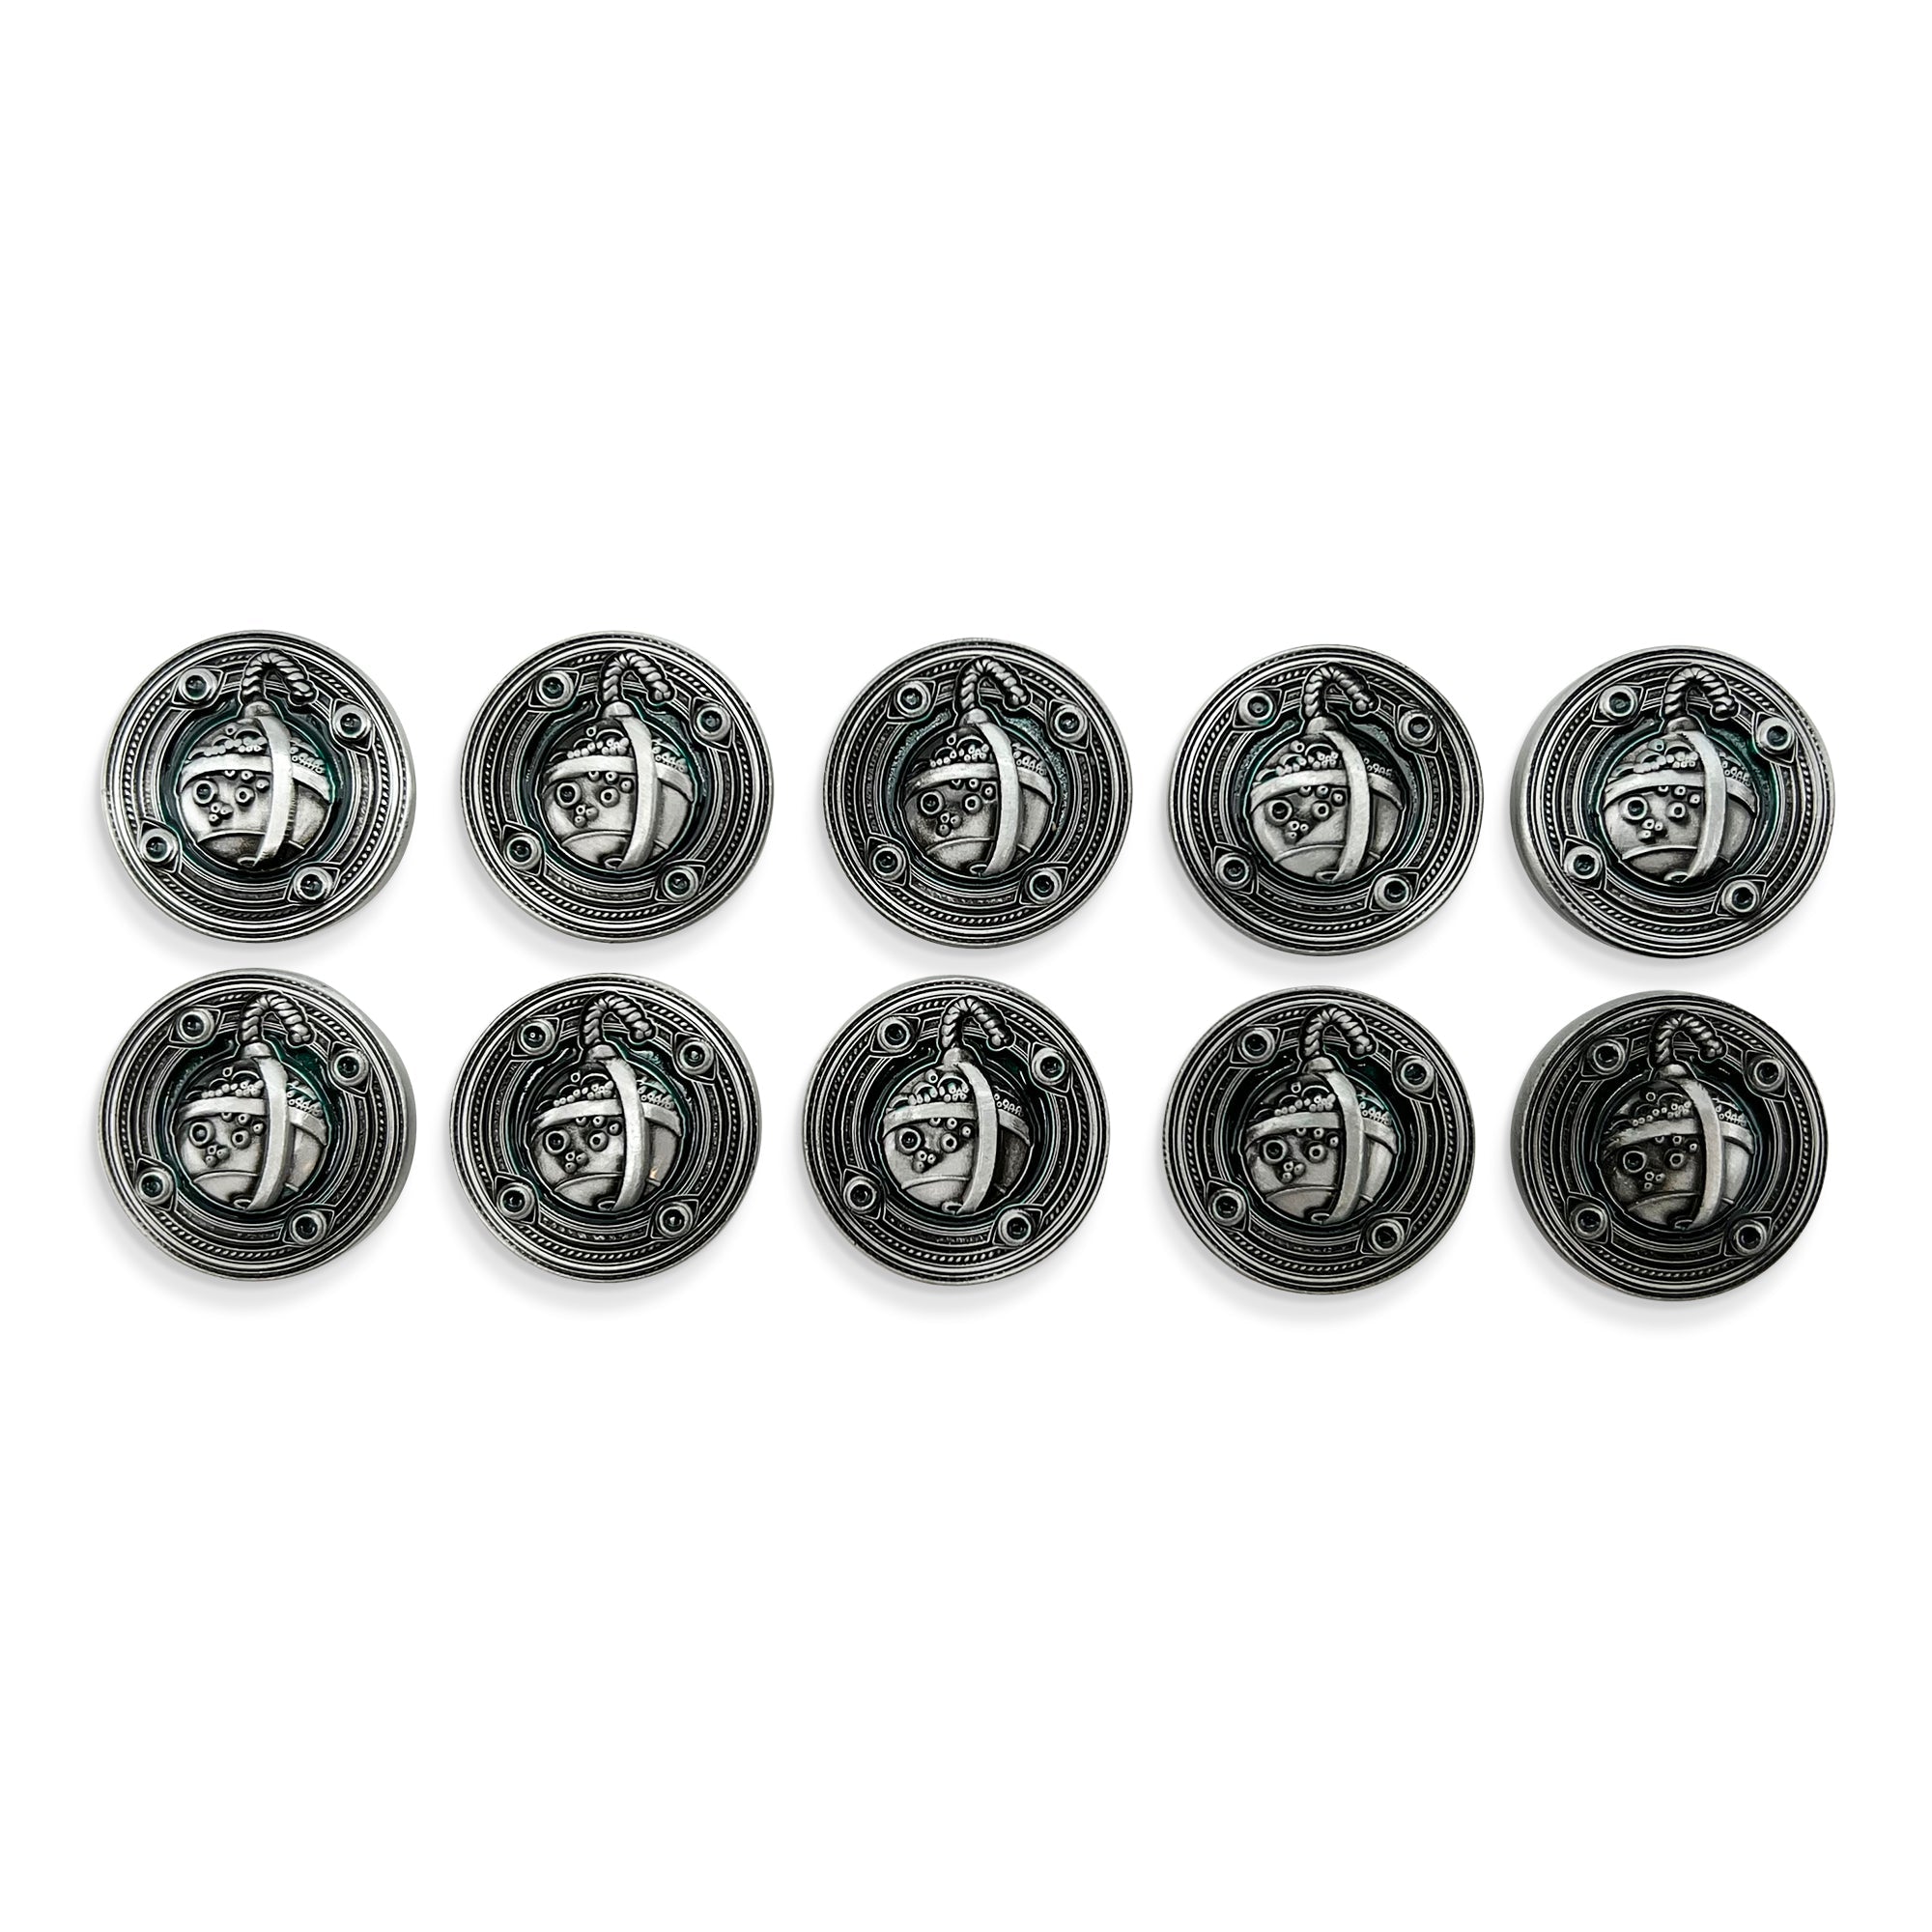 Profession Coins - Inventor Metal Coins Set of 10 - NOR 03405